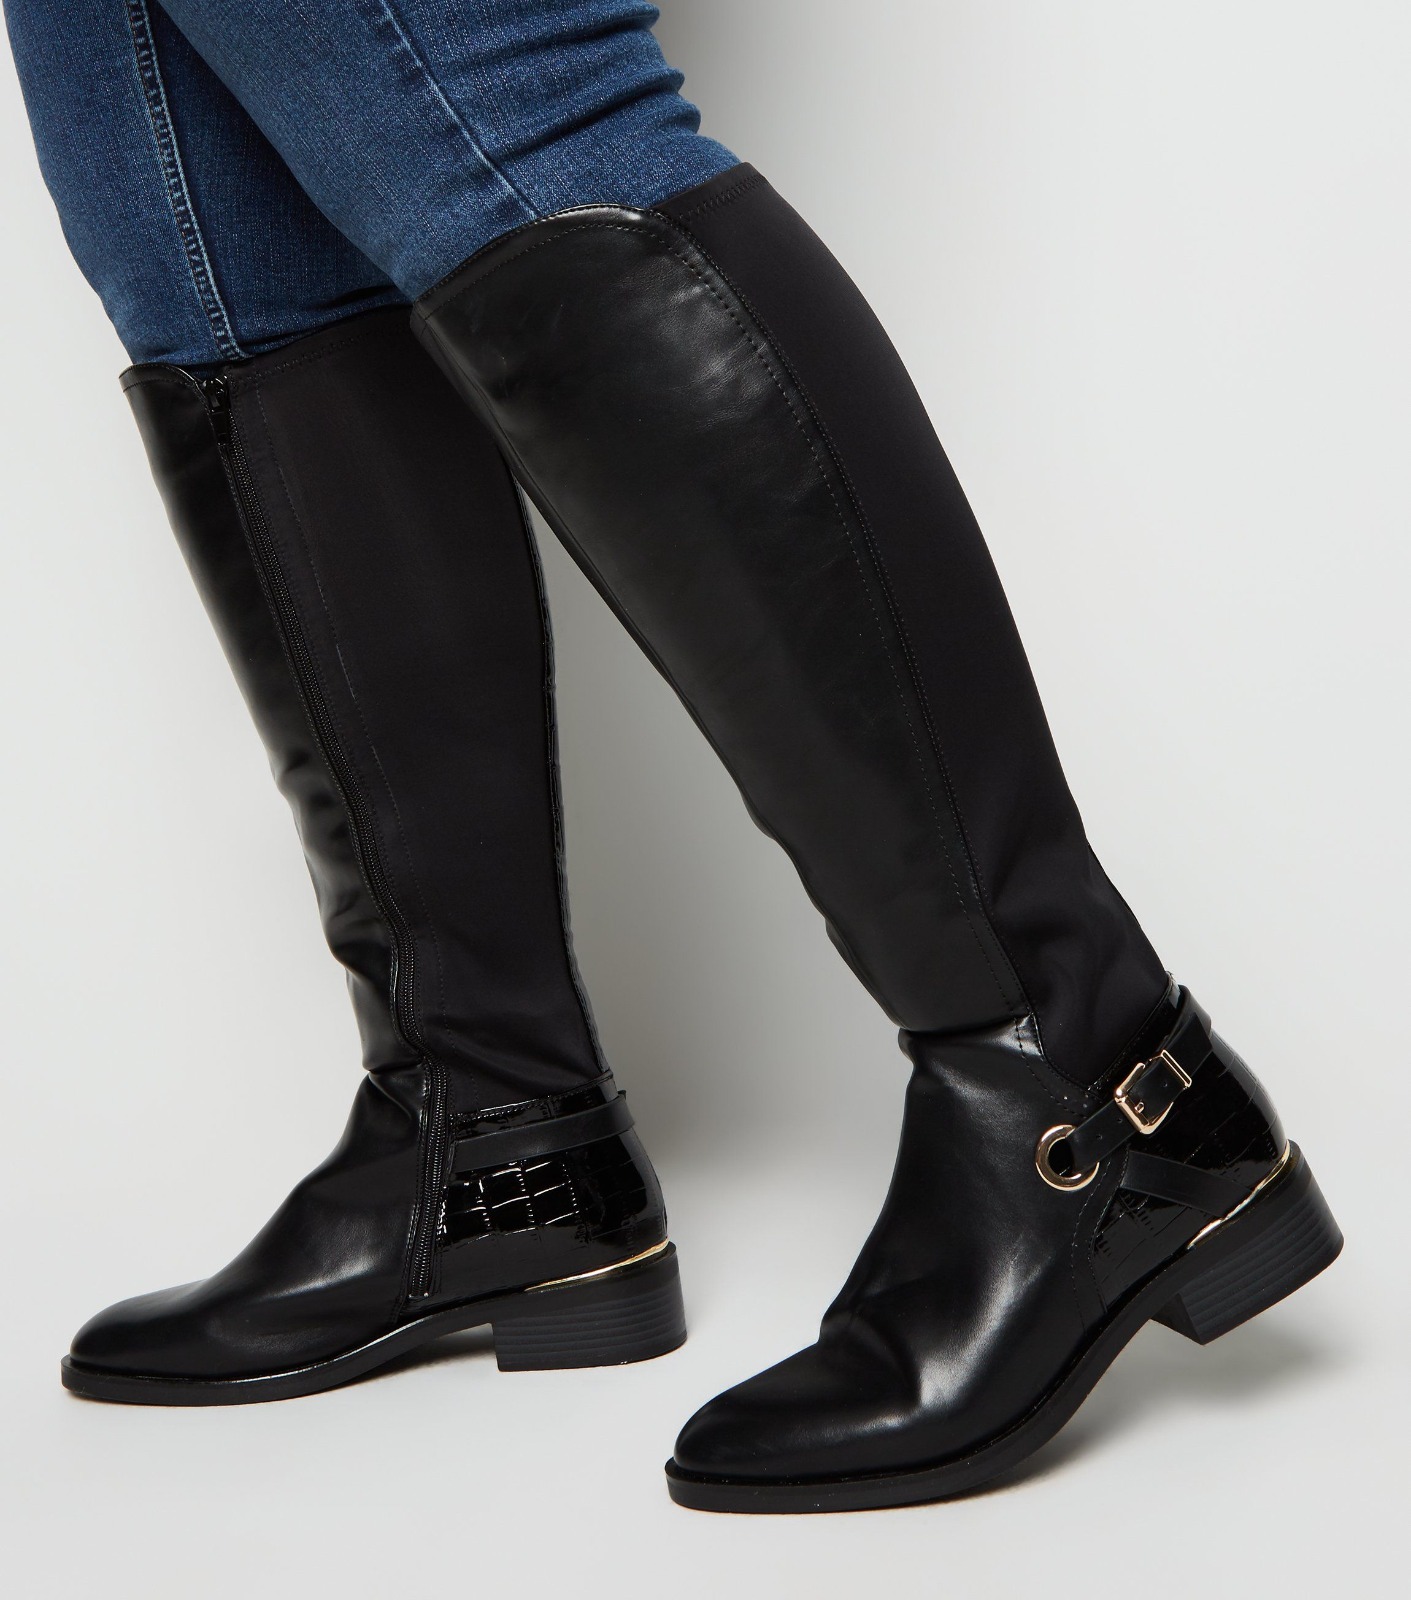 New Look Extra Calf Fit Black Leather Look Knee High Riding Boots 0 2 